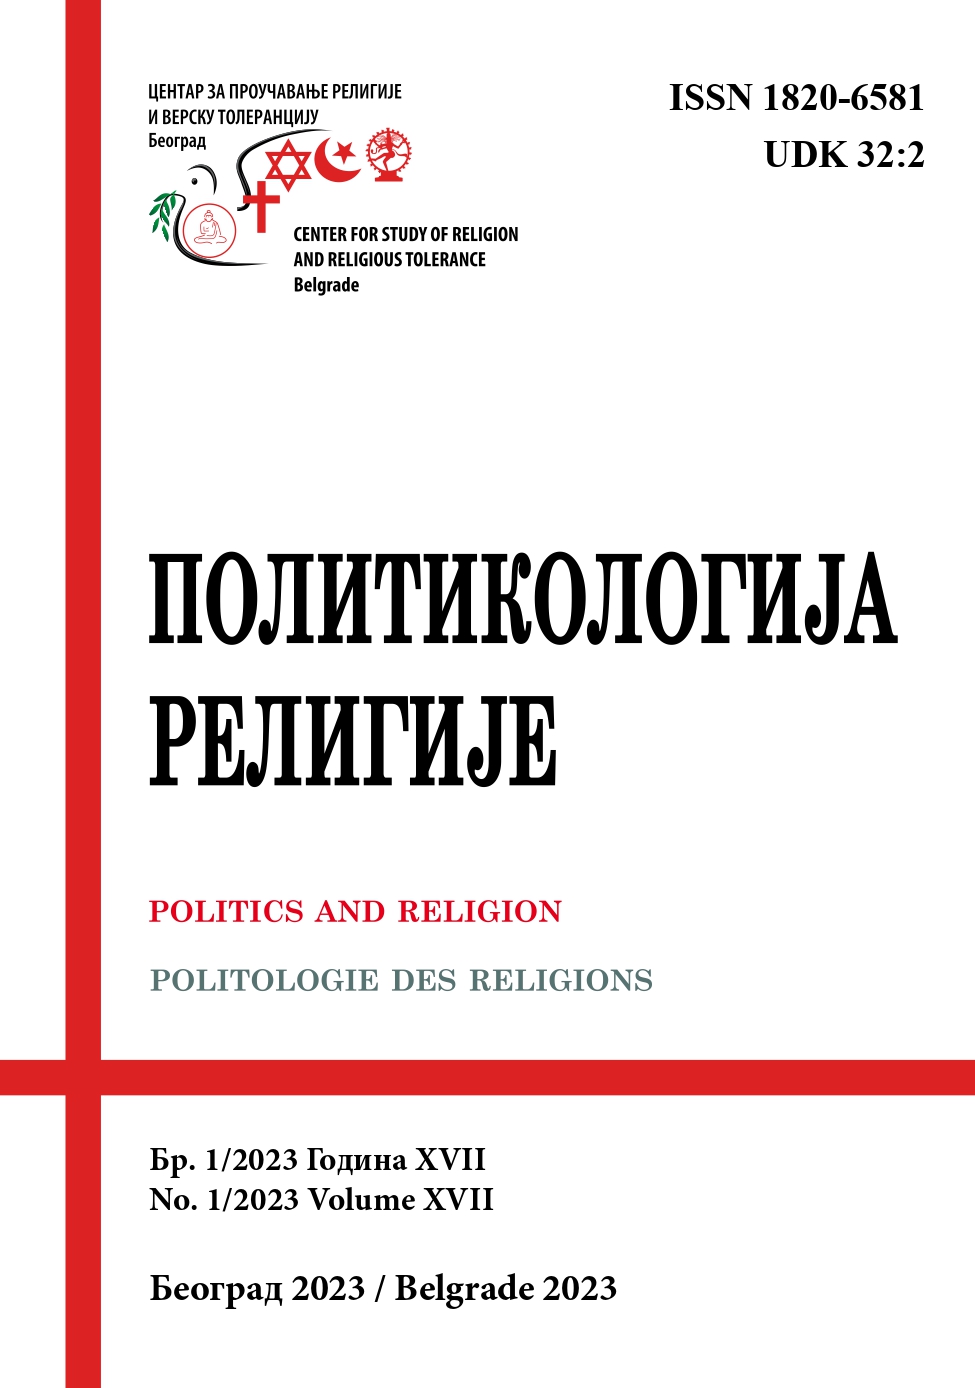 “RELIGION, BIDEN AND SERBIA: RELIGIOUS FACTOR IN THE POLITICS OF PRESIDENT BIDEN ANDHOW COULD IT AFFECT SERBIAN INTERESTS”